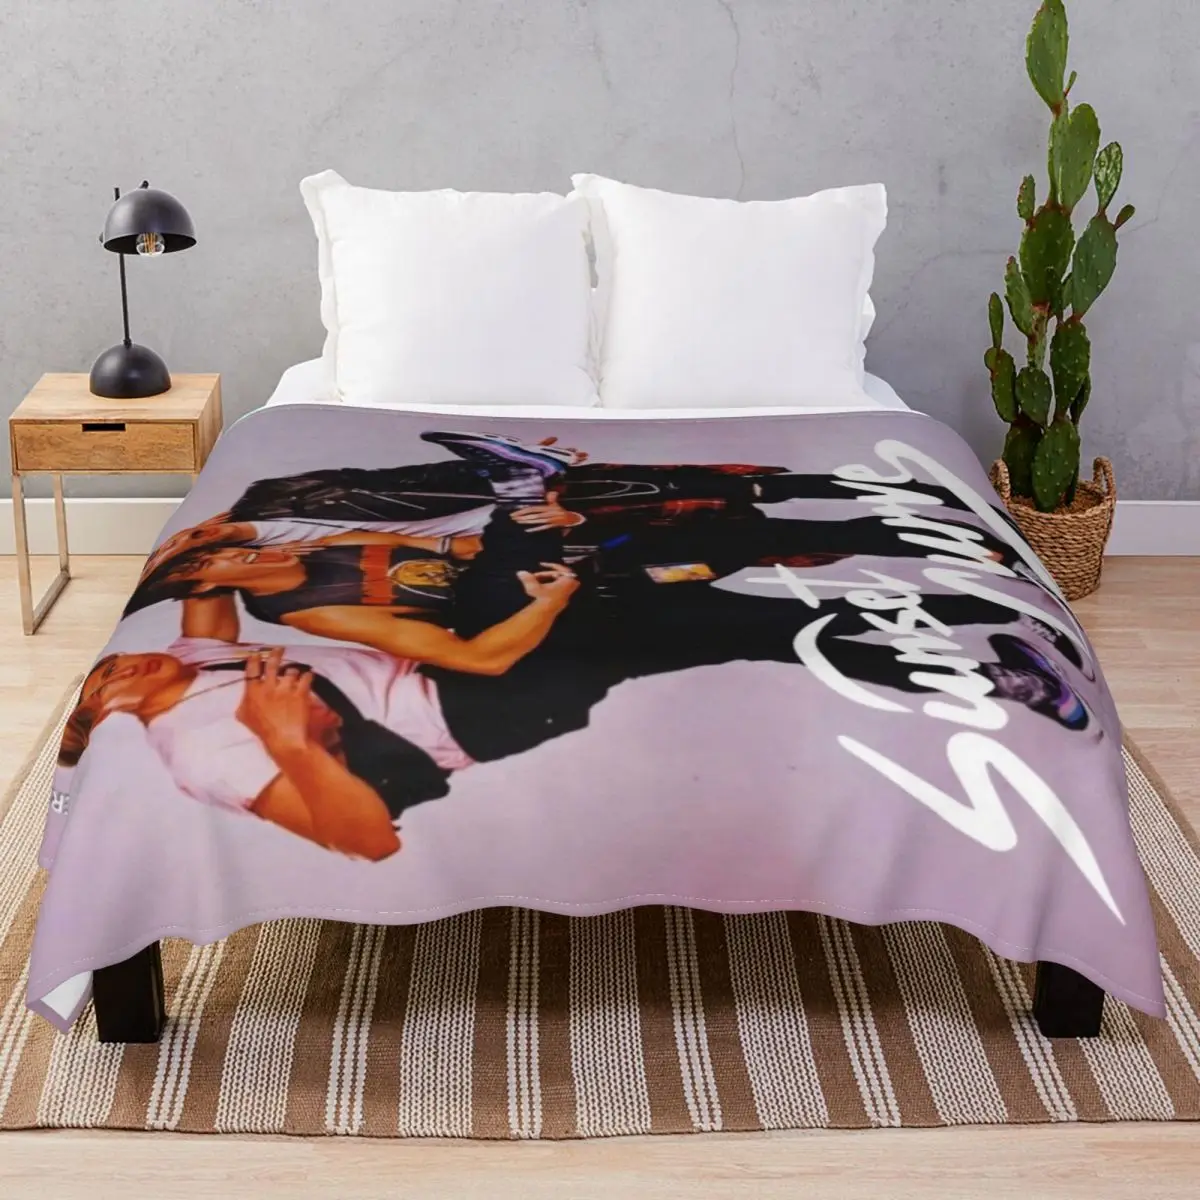 Sunset Curve Band Poster Blankets Fleece All Season Ultra-Soft Throw Blanket for Bed Sofa Travel Office